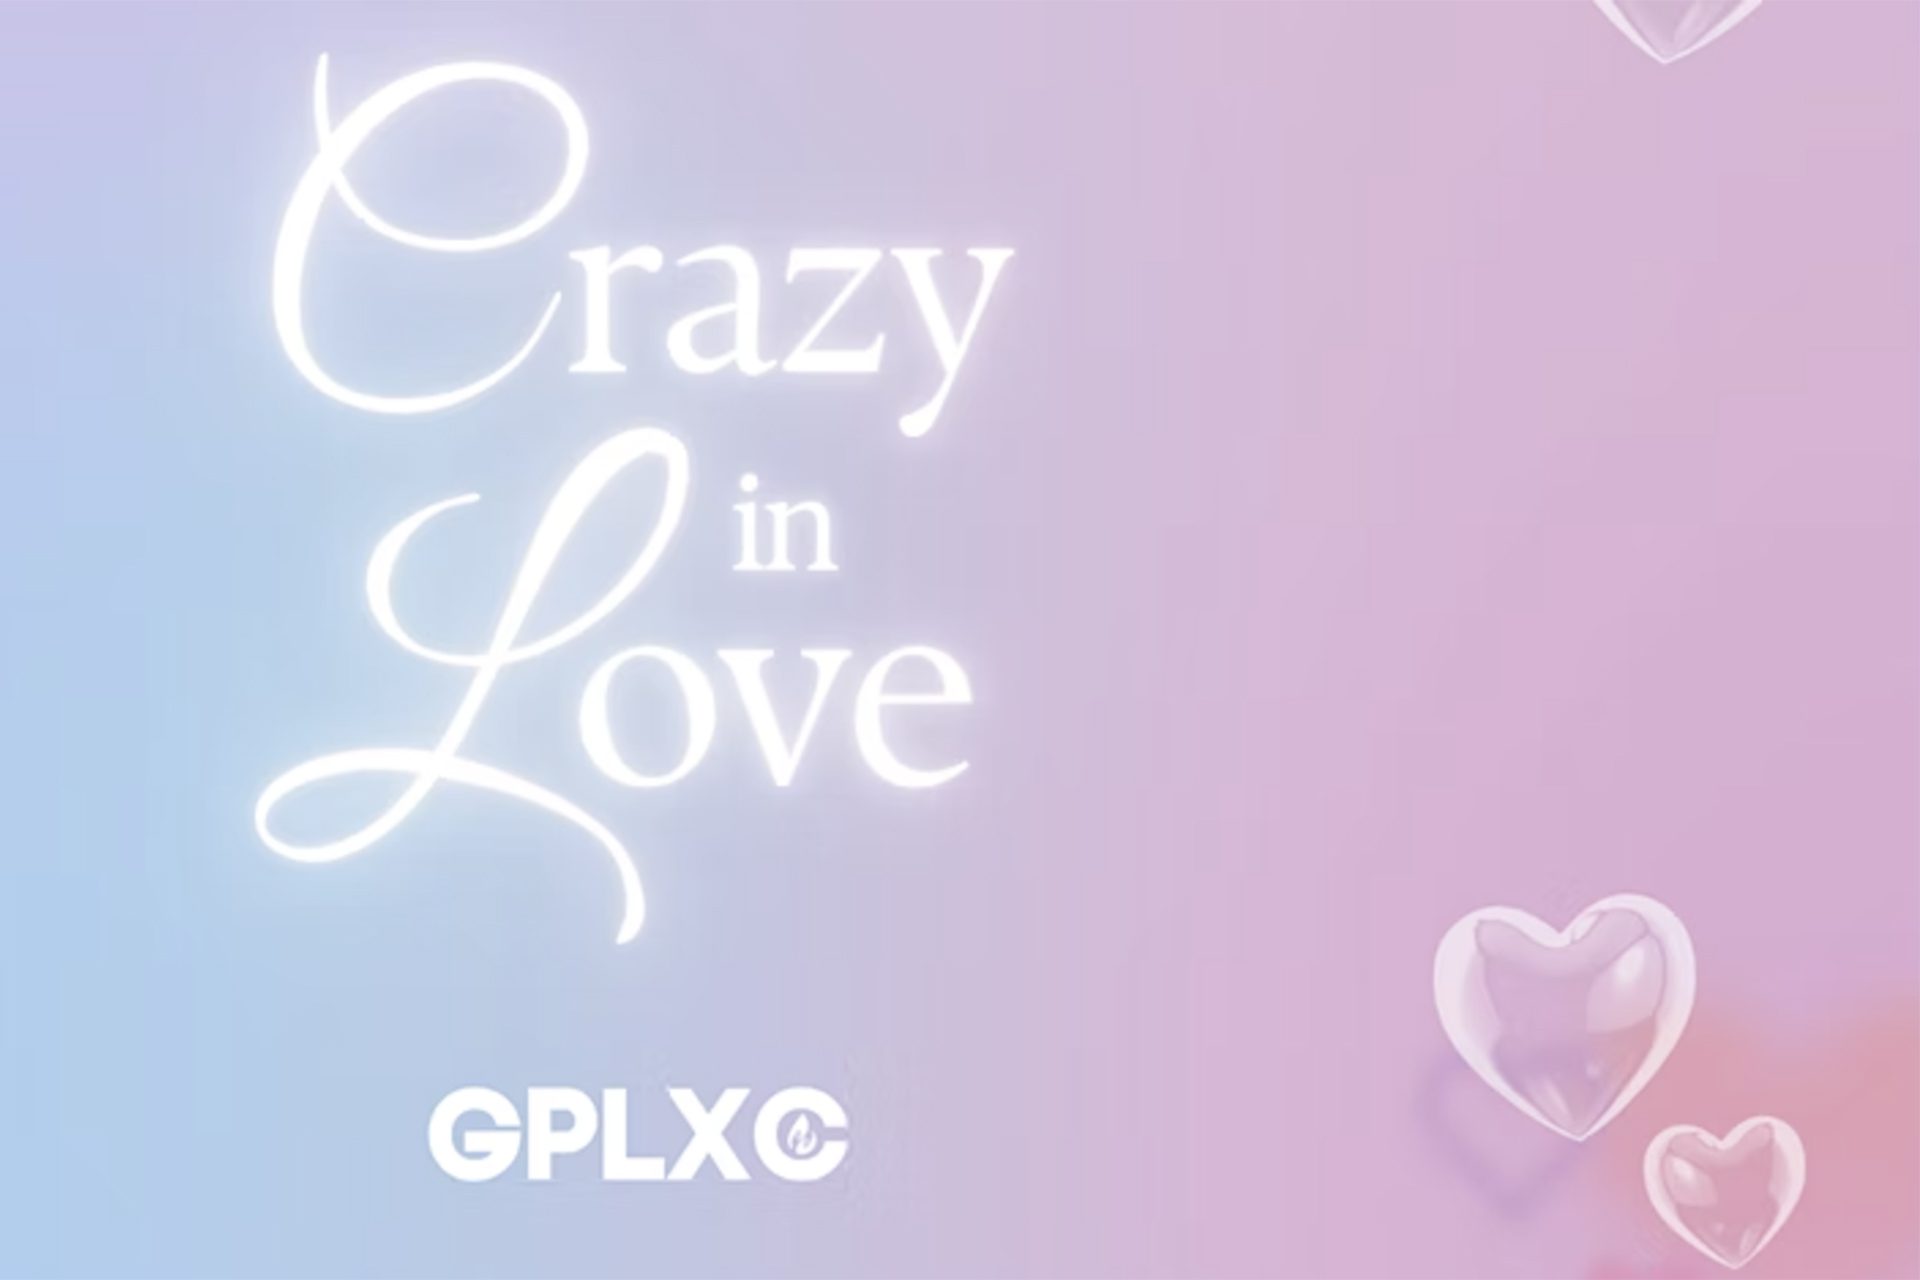 The words "Crazy in Love" and "GPLXC" on a blue and pink background with hearts